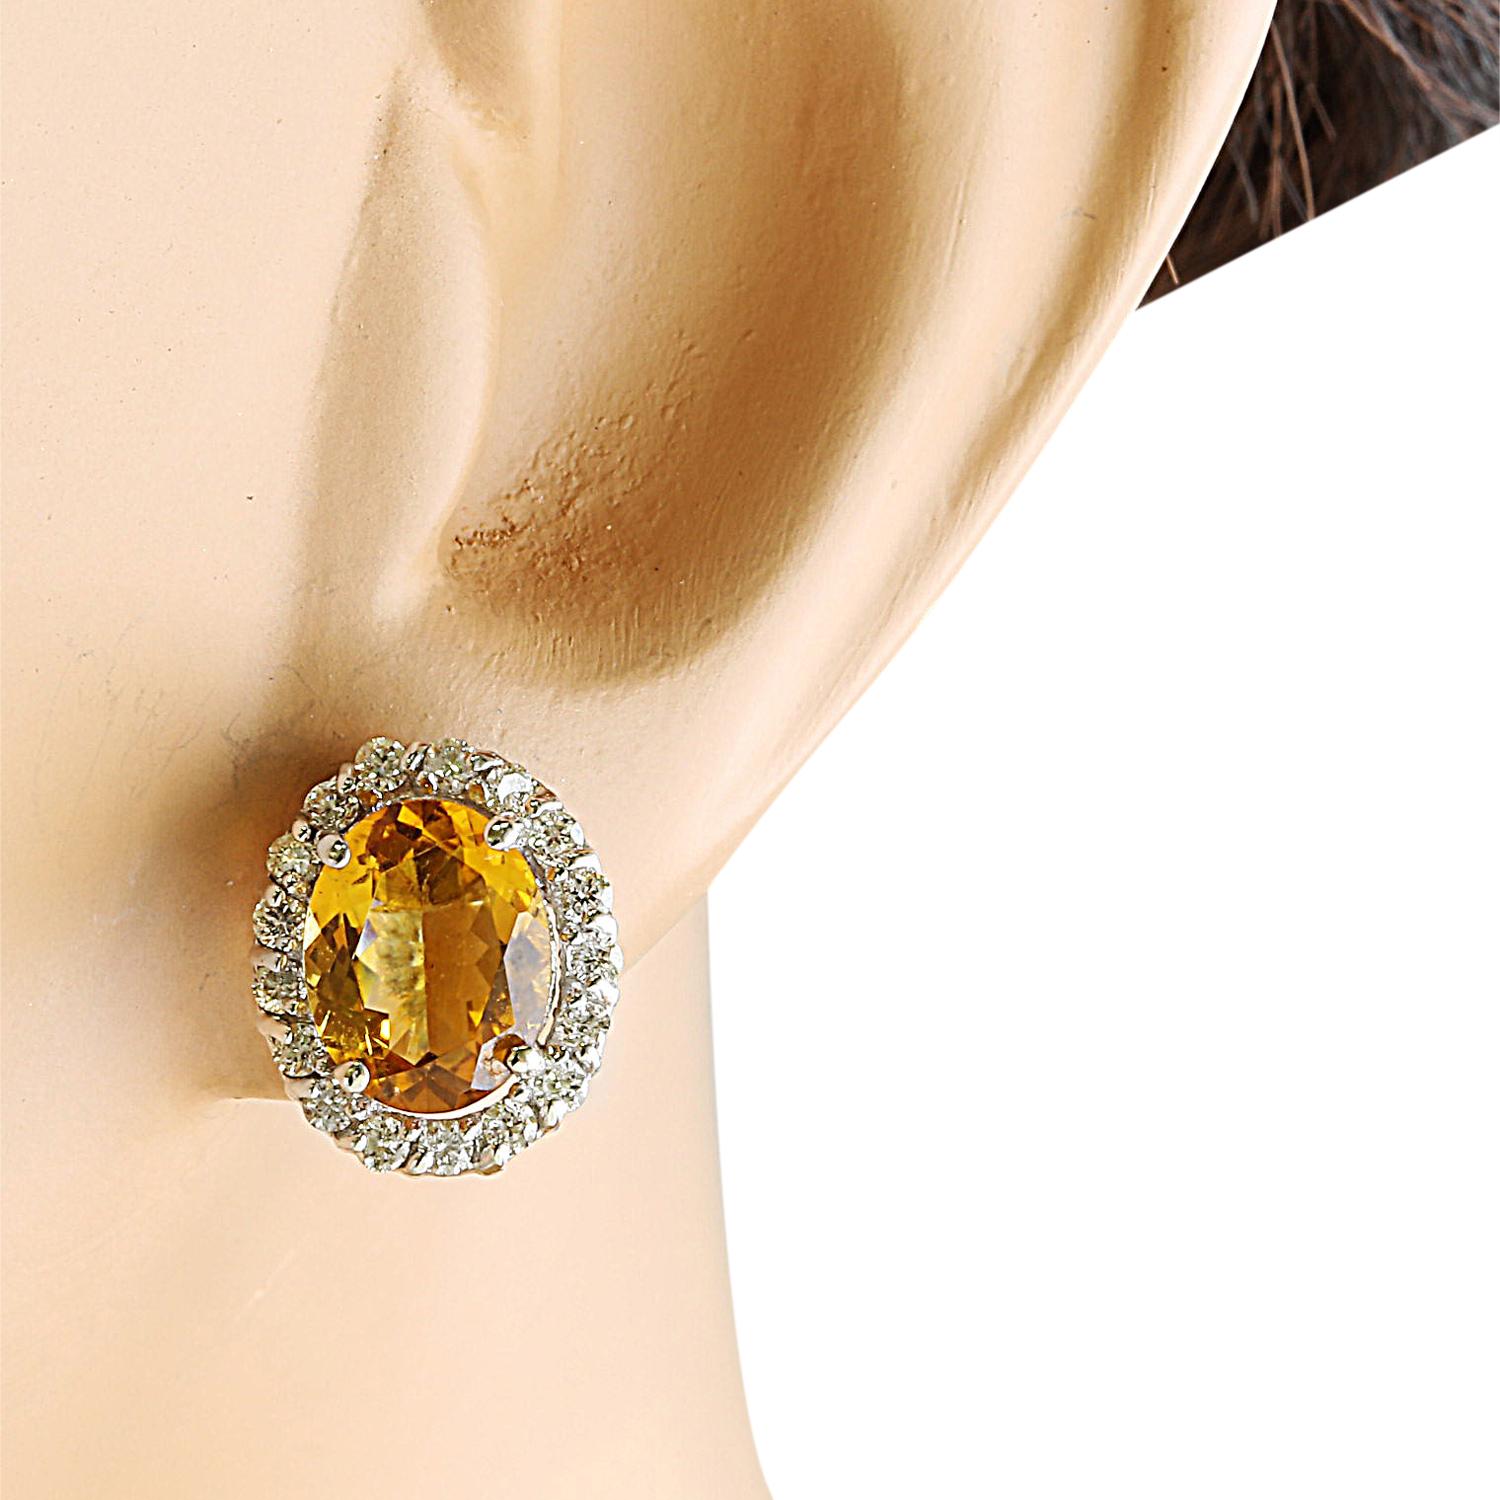 3.90 Carat Natural Citrine 14 Karat Solid White Gold Diamond Earrings
Stamped: 14K 
Total Earrings Weight: 2.8 Grams 
Citrine Weight: 3.20 Carat (9.00x7.00 Millimeters)  
Quantity: 2
Diamond Weight: 0.70 Carat (F-G Color, VS2-SI1 Clarity)
Quantity: